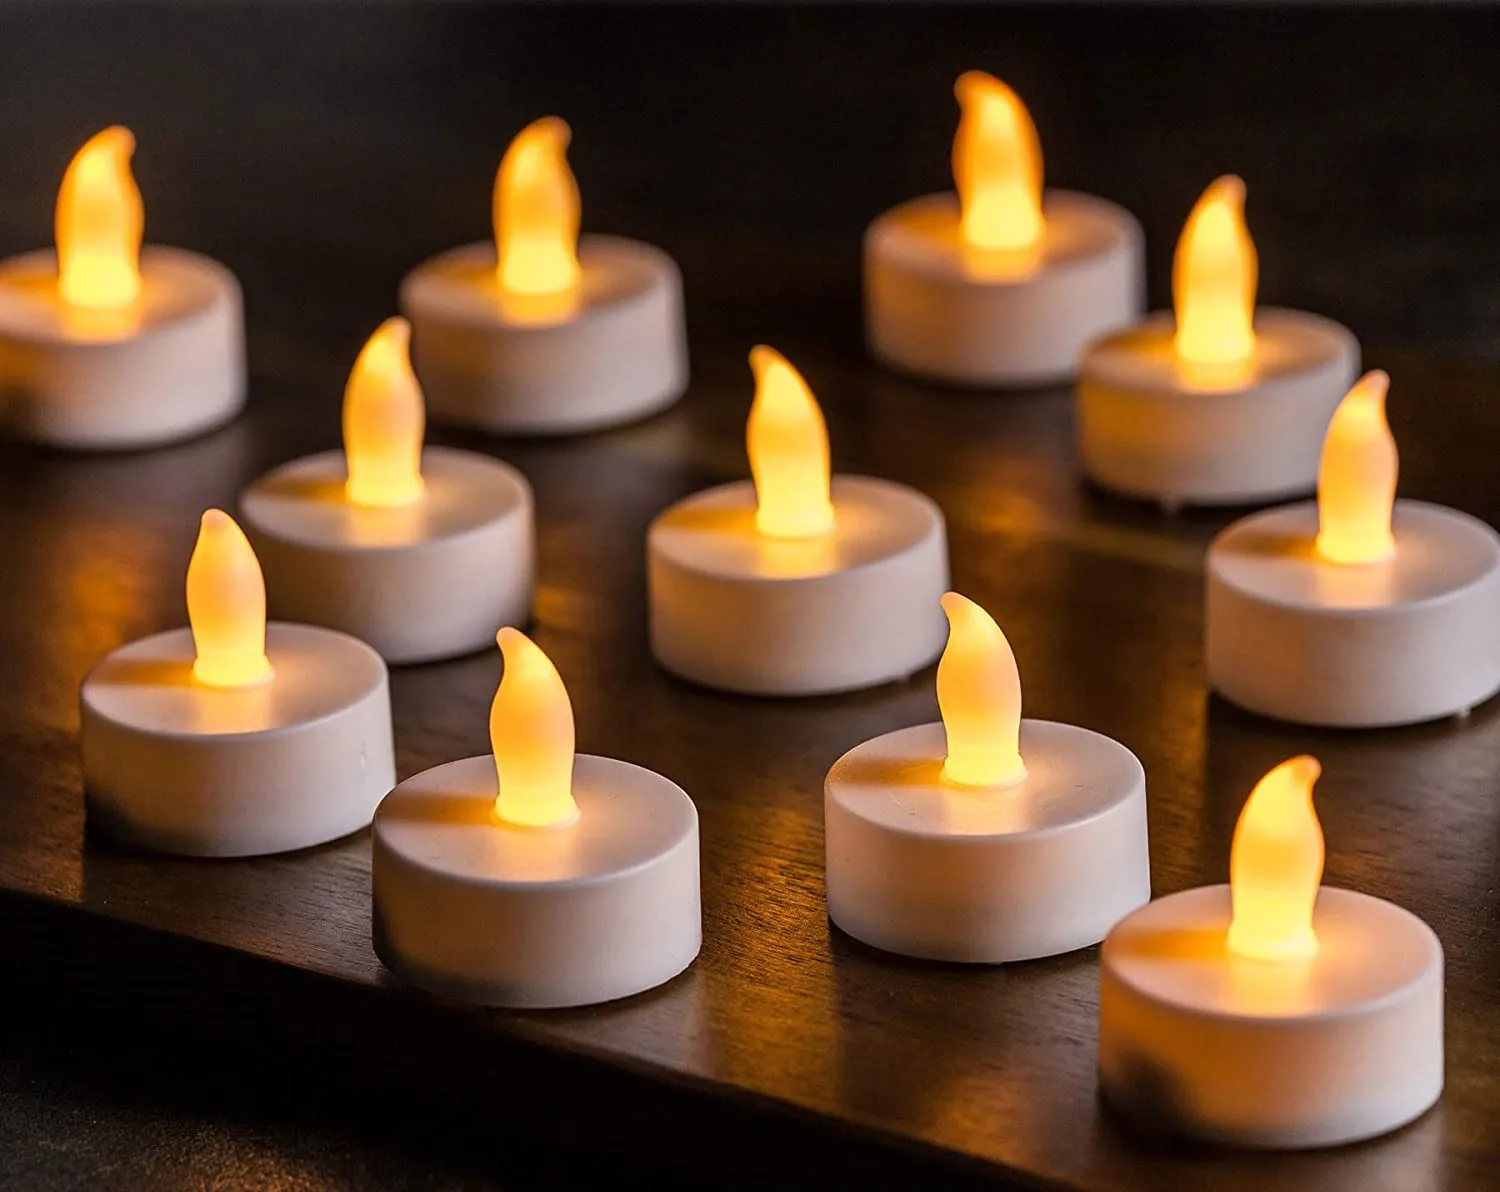 LED Tealight Candles,Flickering Bright Battery Candles Operated Candles Flameless Batteries Included